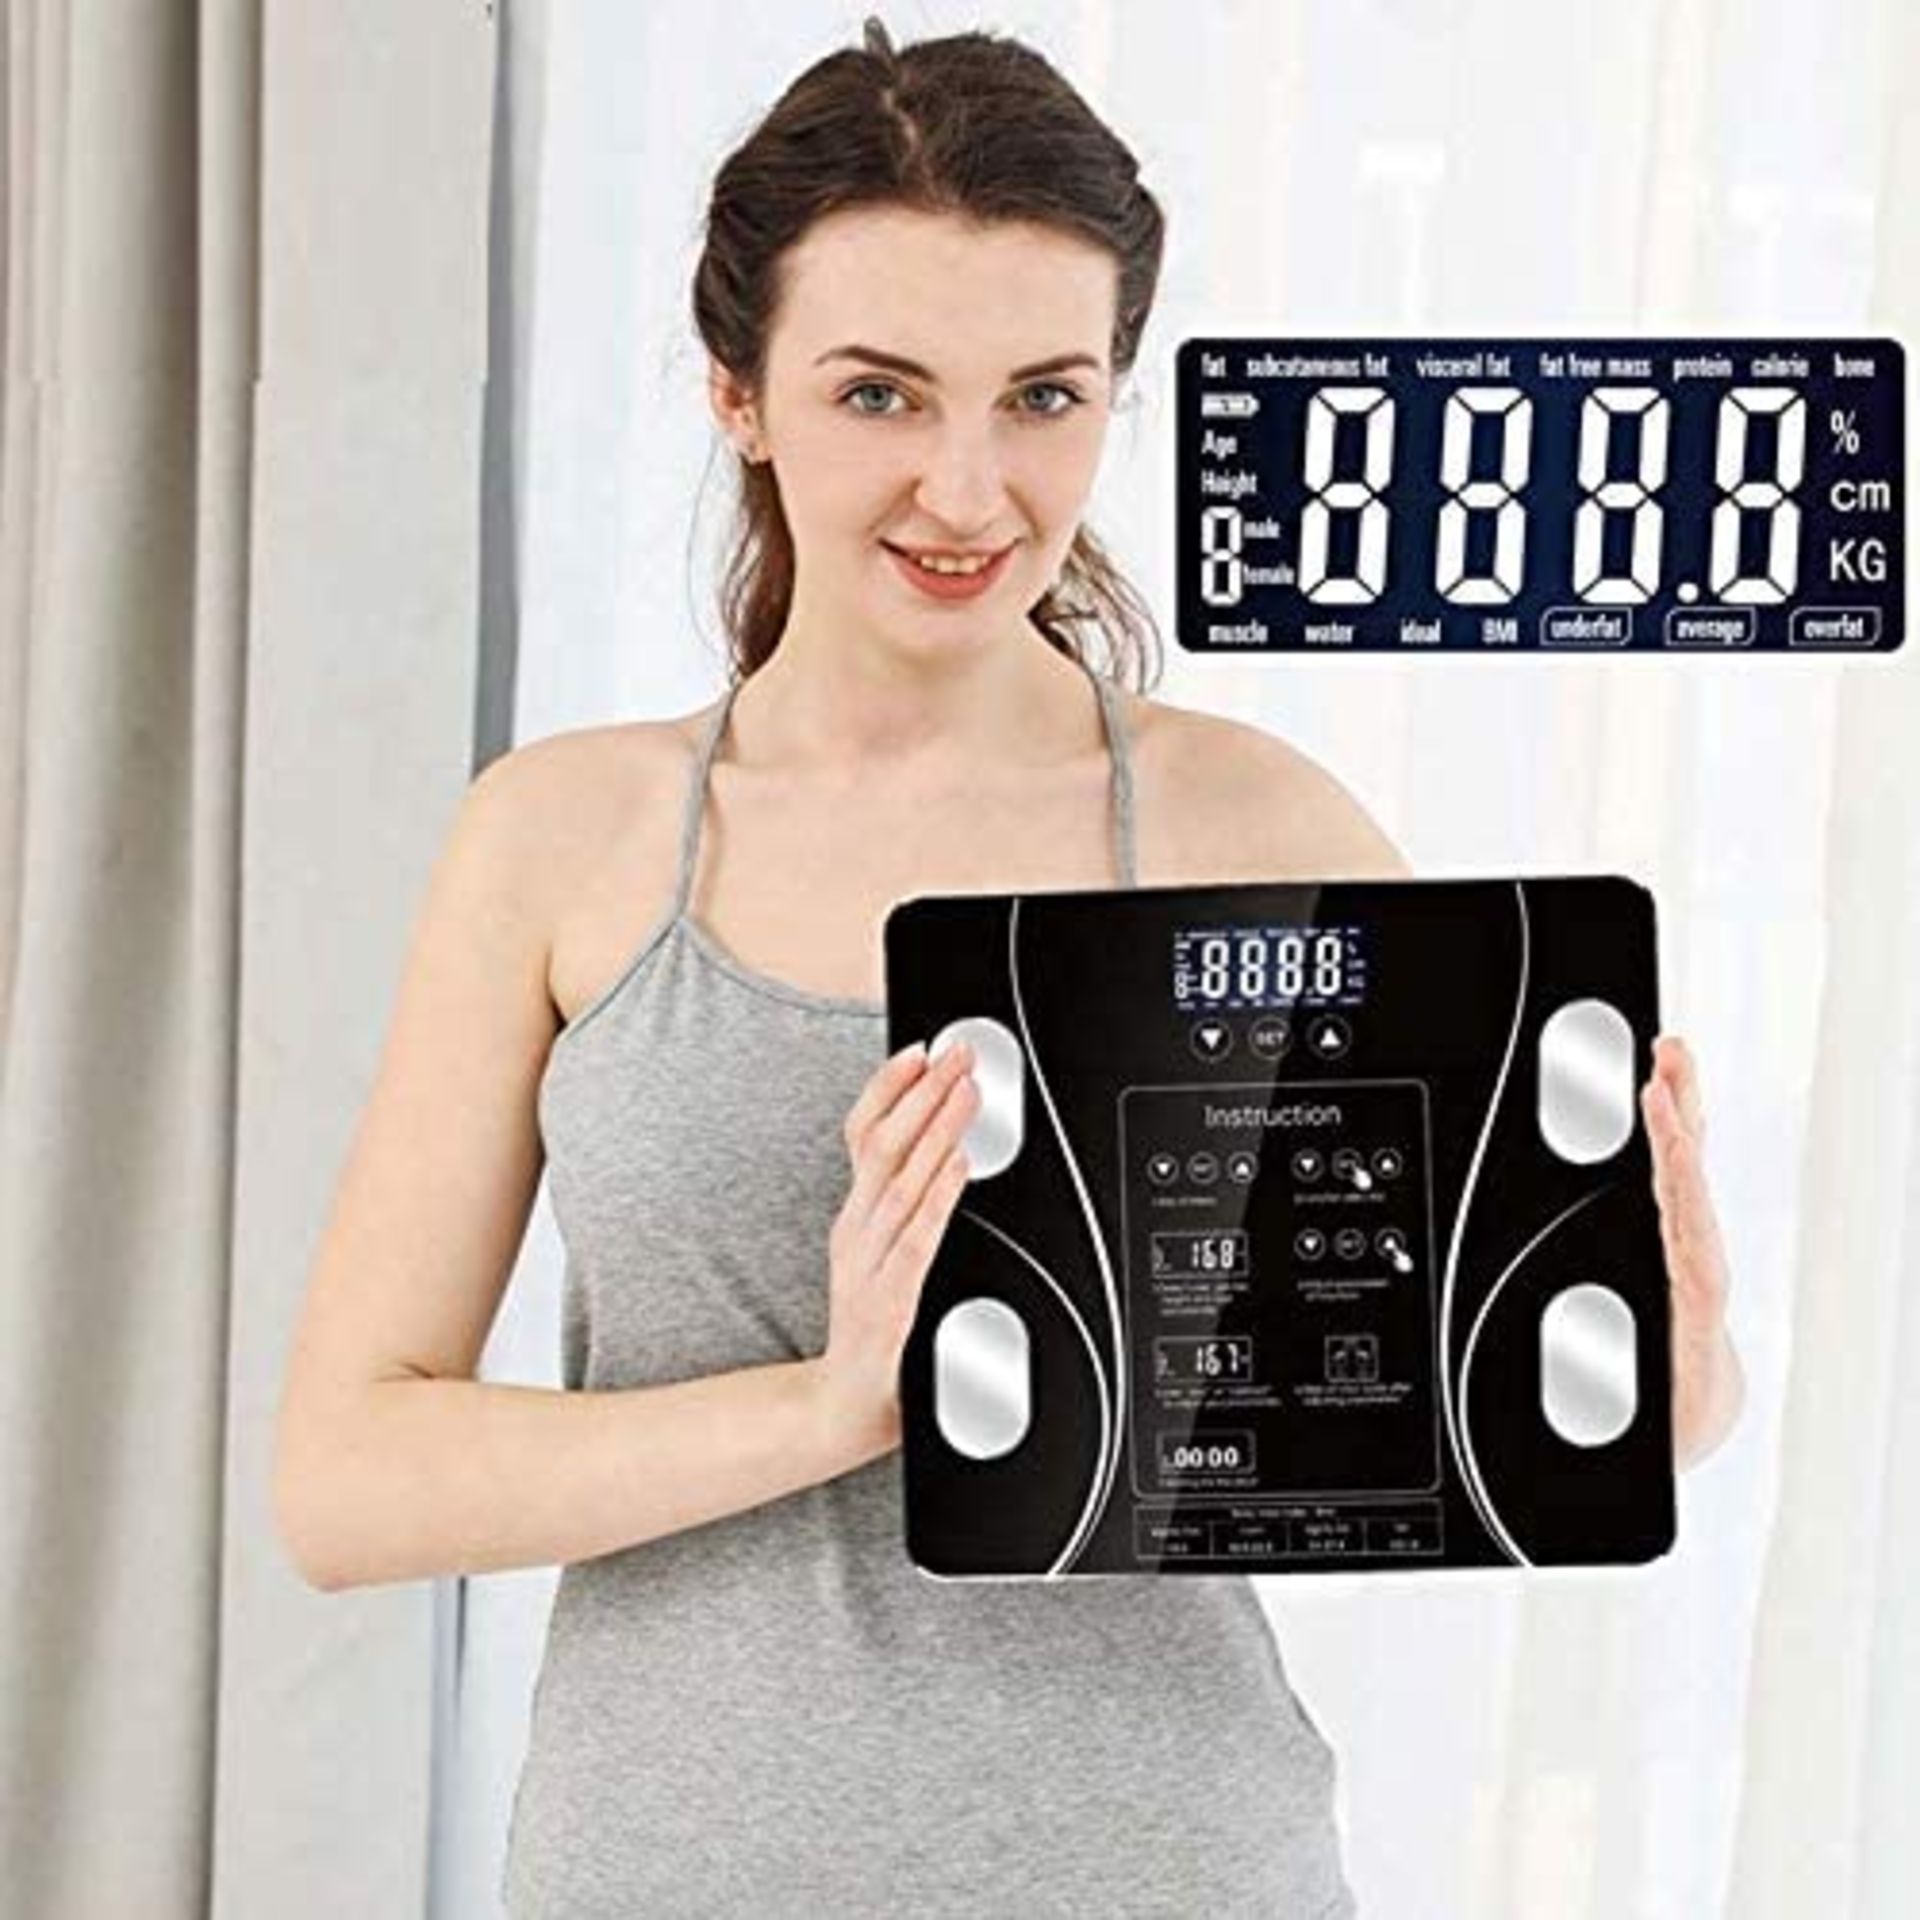 1 x Exeton, Body Weighing Scale, Bluetooth Smart, Body Fat, BMI, Rechargeable 180Kg (396 Lbs) - Image 6 of 7